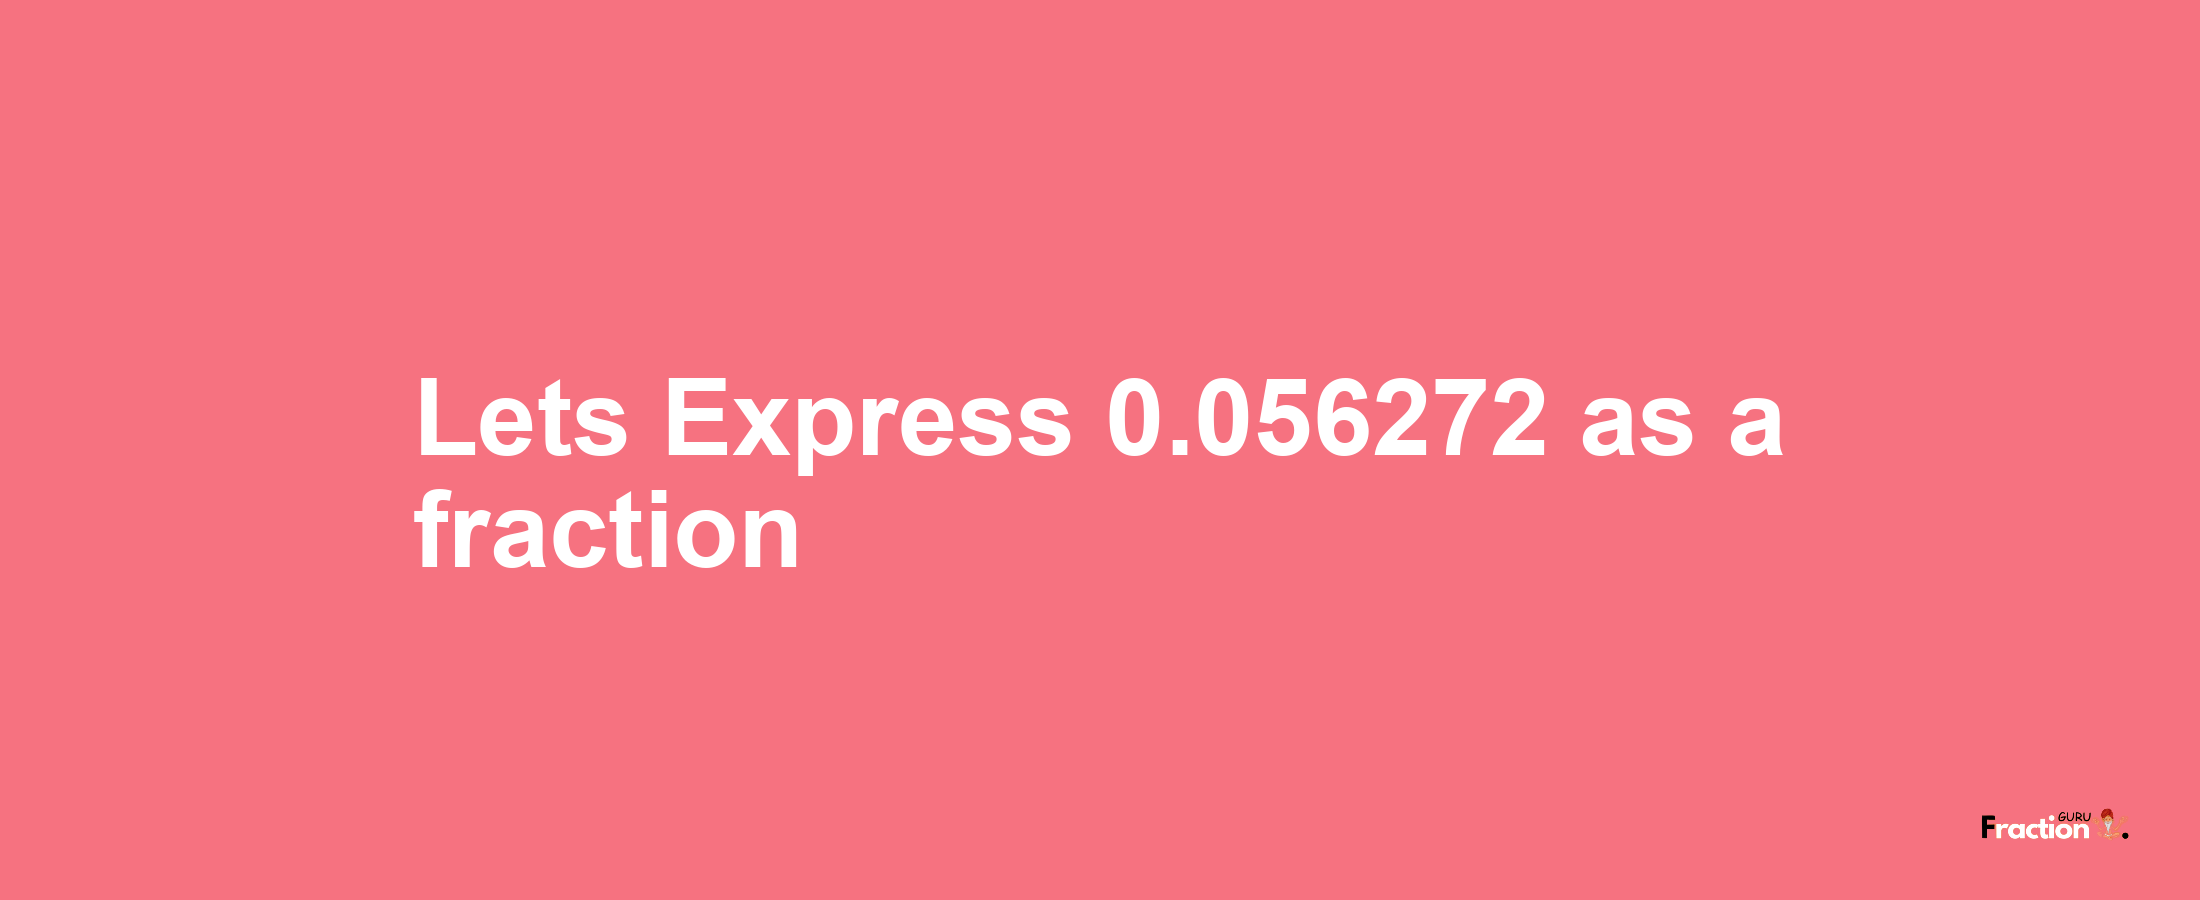 Lets Express 0.056272 as afraction